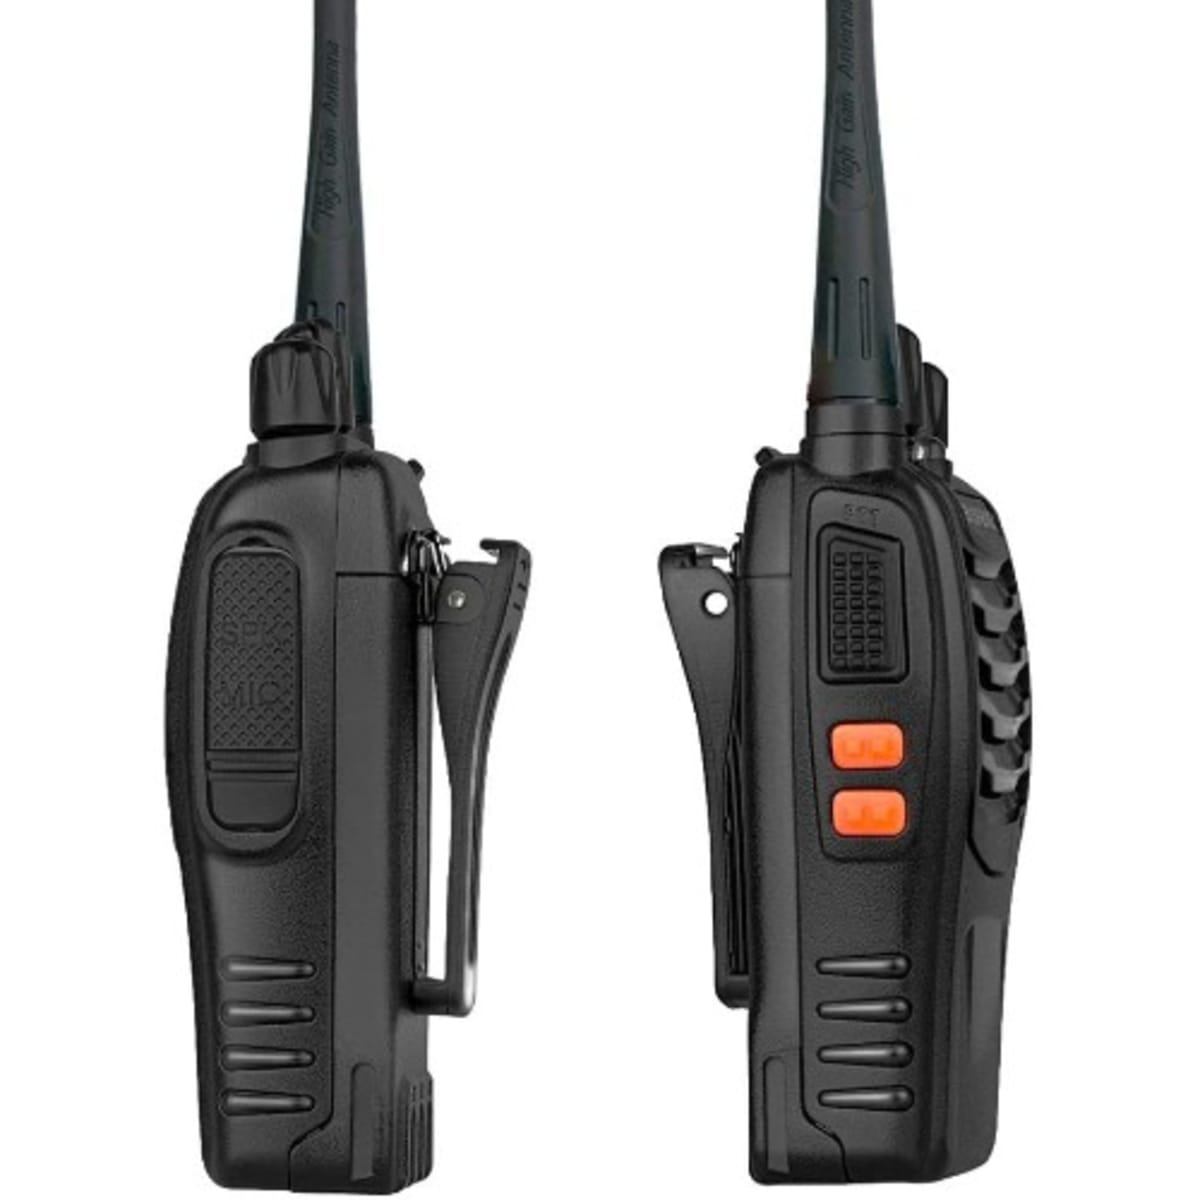 BAOFENG BF-888S Two Way Radio (Pack of 6pcs radios) Customize Package - 2